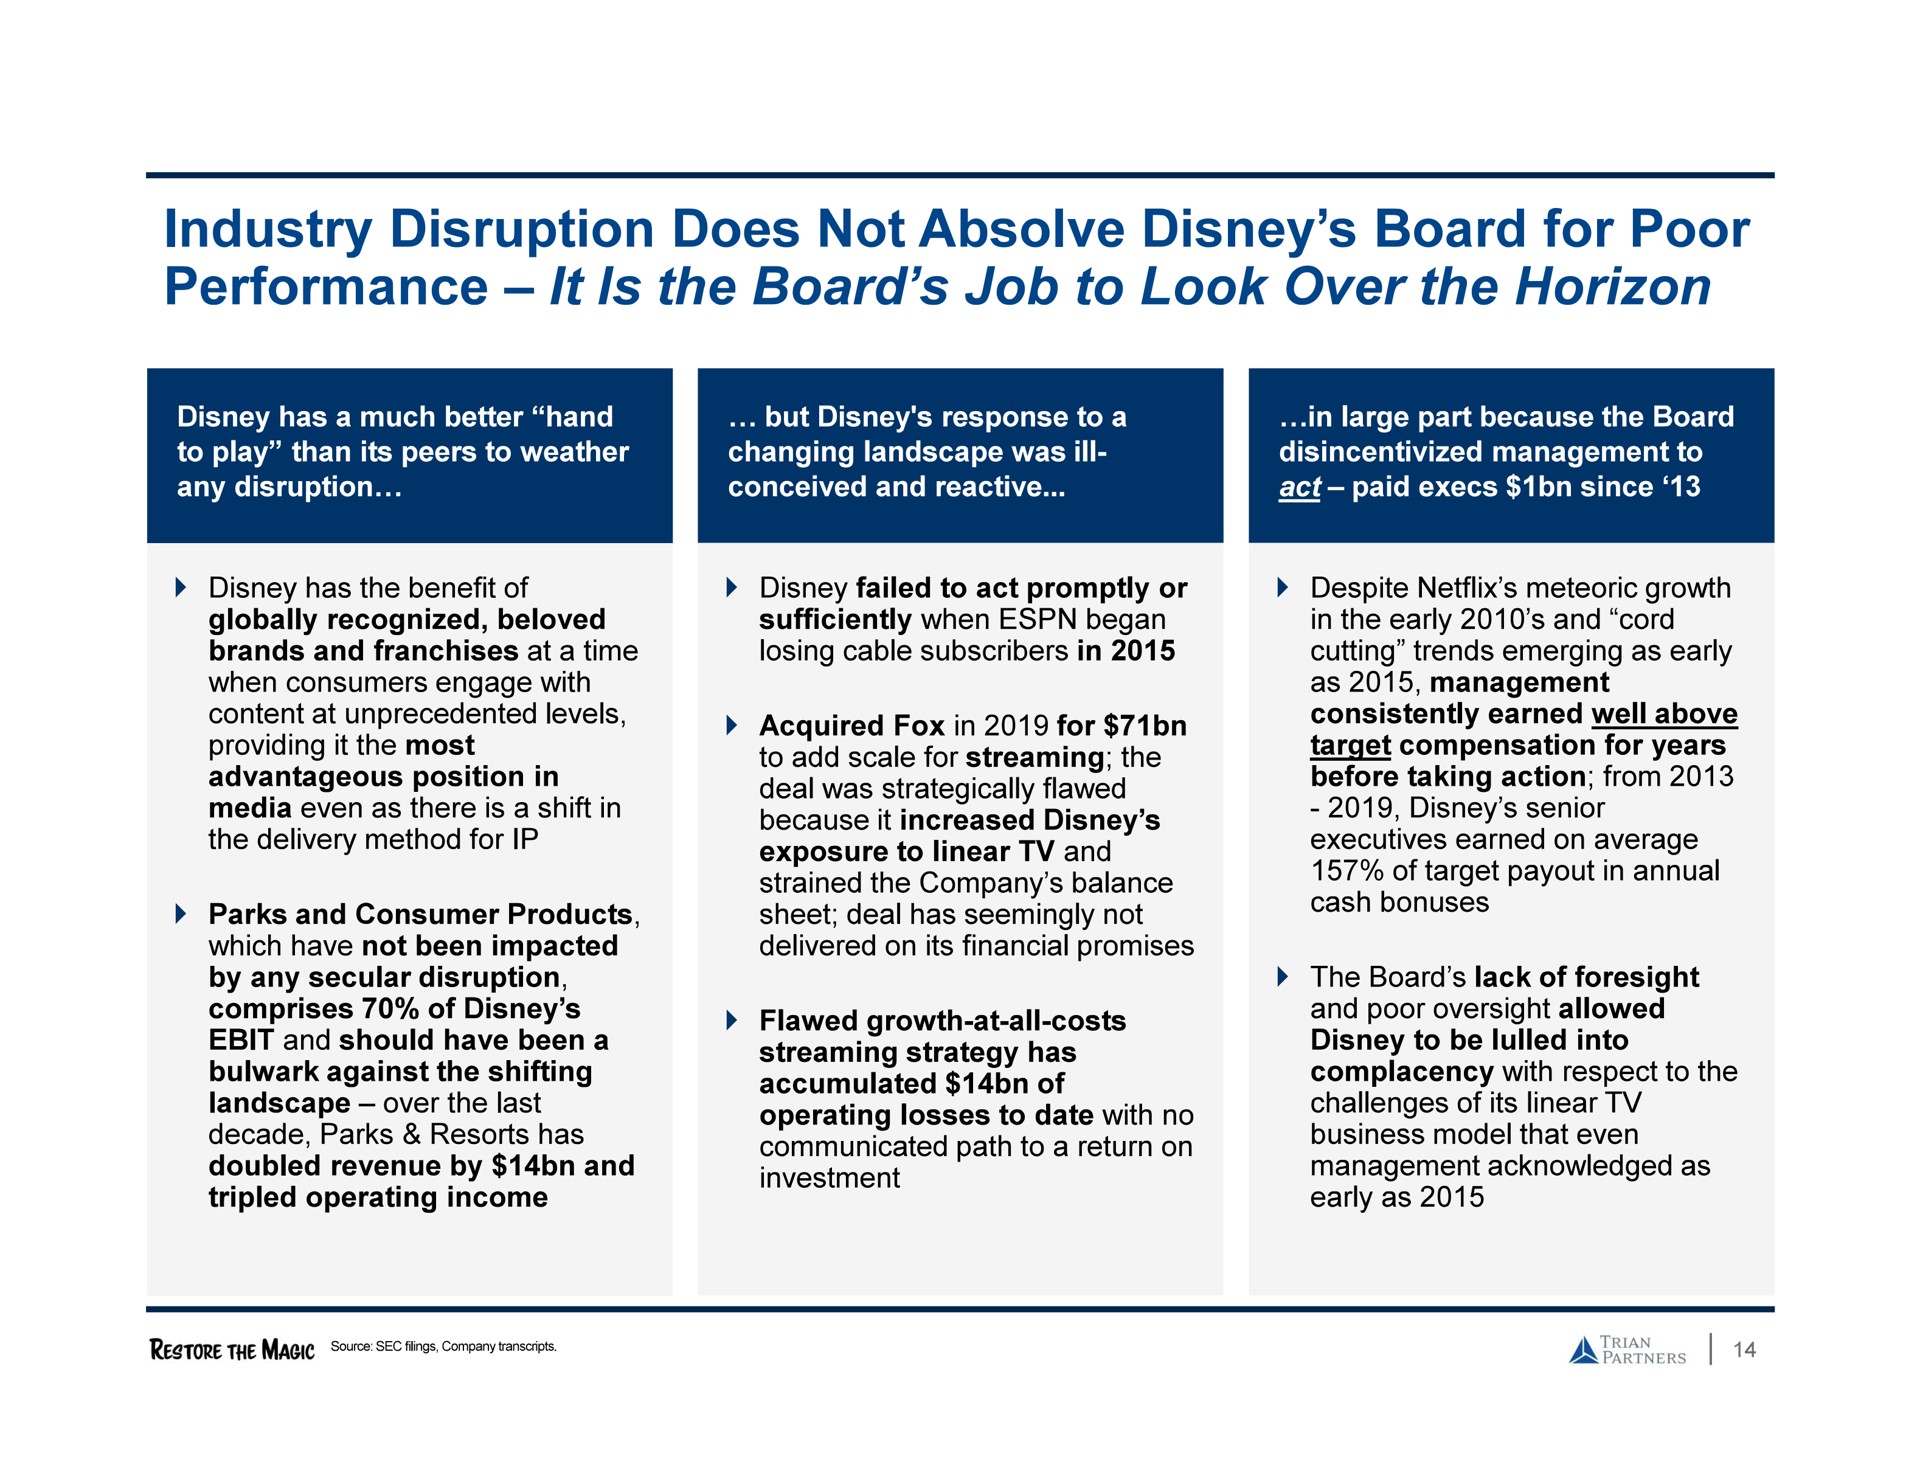 industry disruption does not absolve board for poor performance it is the board job to look over the horizon | Trian Partners